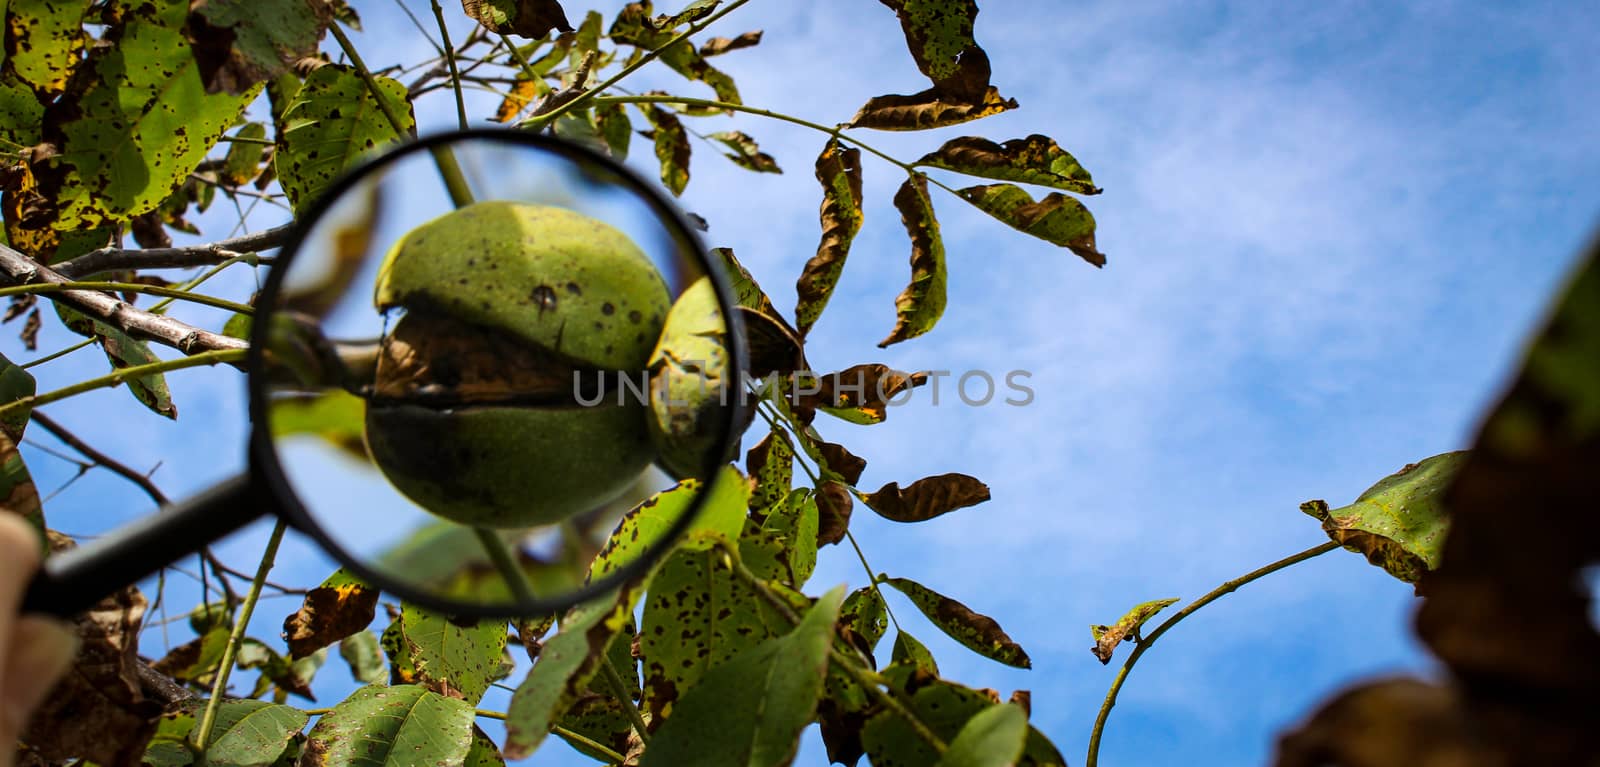 Walnut fruit banner magnified with a magnifying glass. Ripe walnut inside a cracked green shell on a branch with the sky in the background. Banner. Zavidovici, Bosnia and Herzegovina.